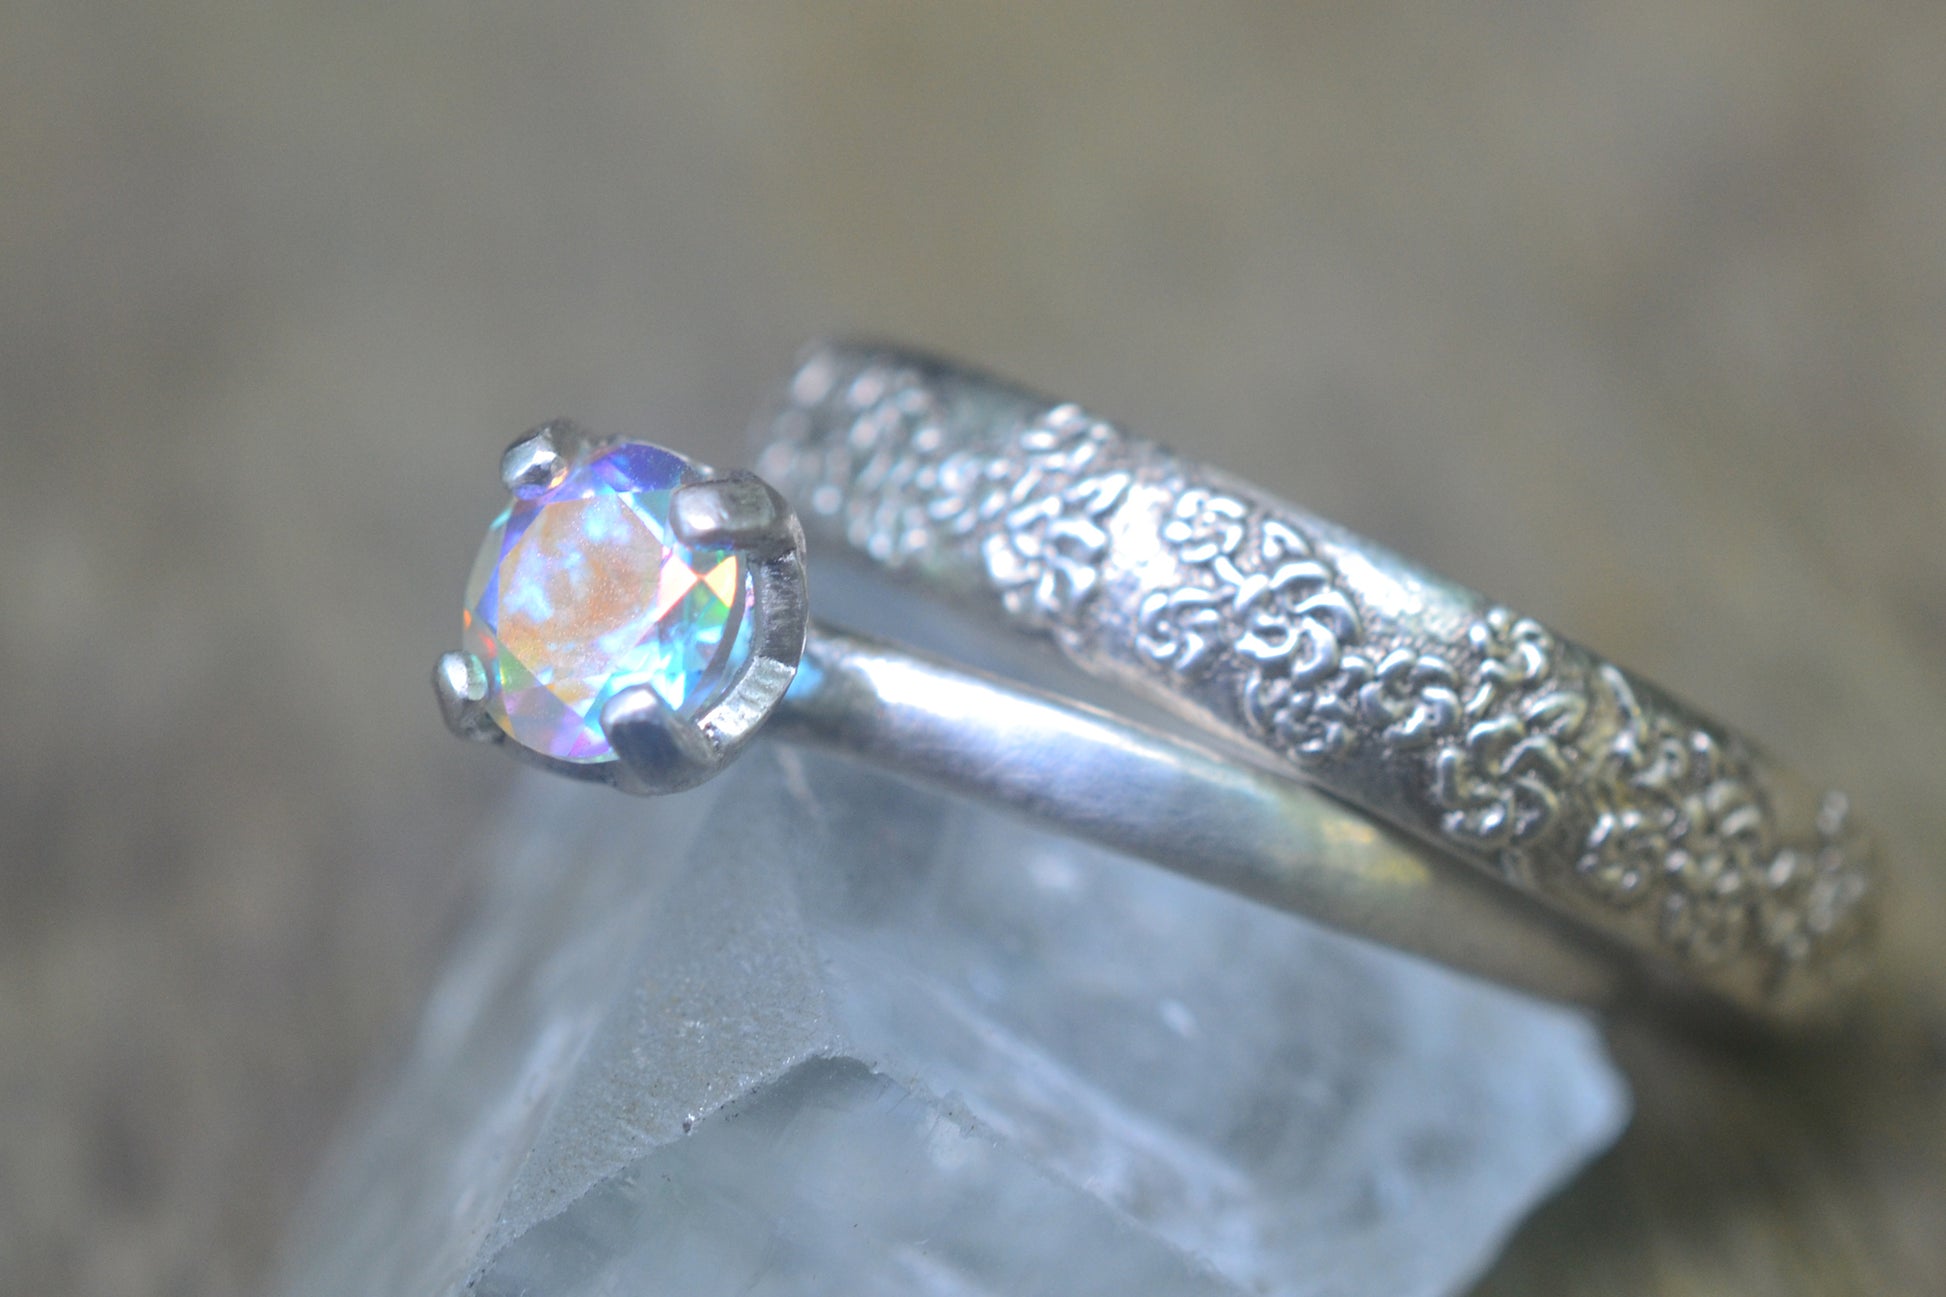 5mm Mystic Topaz Ring With Cherry Blossom Band